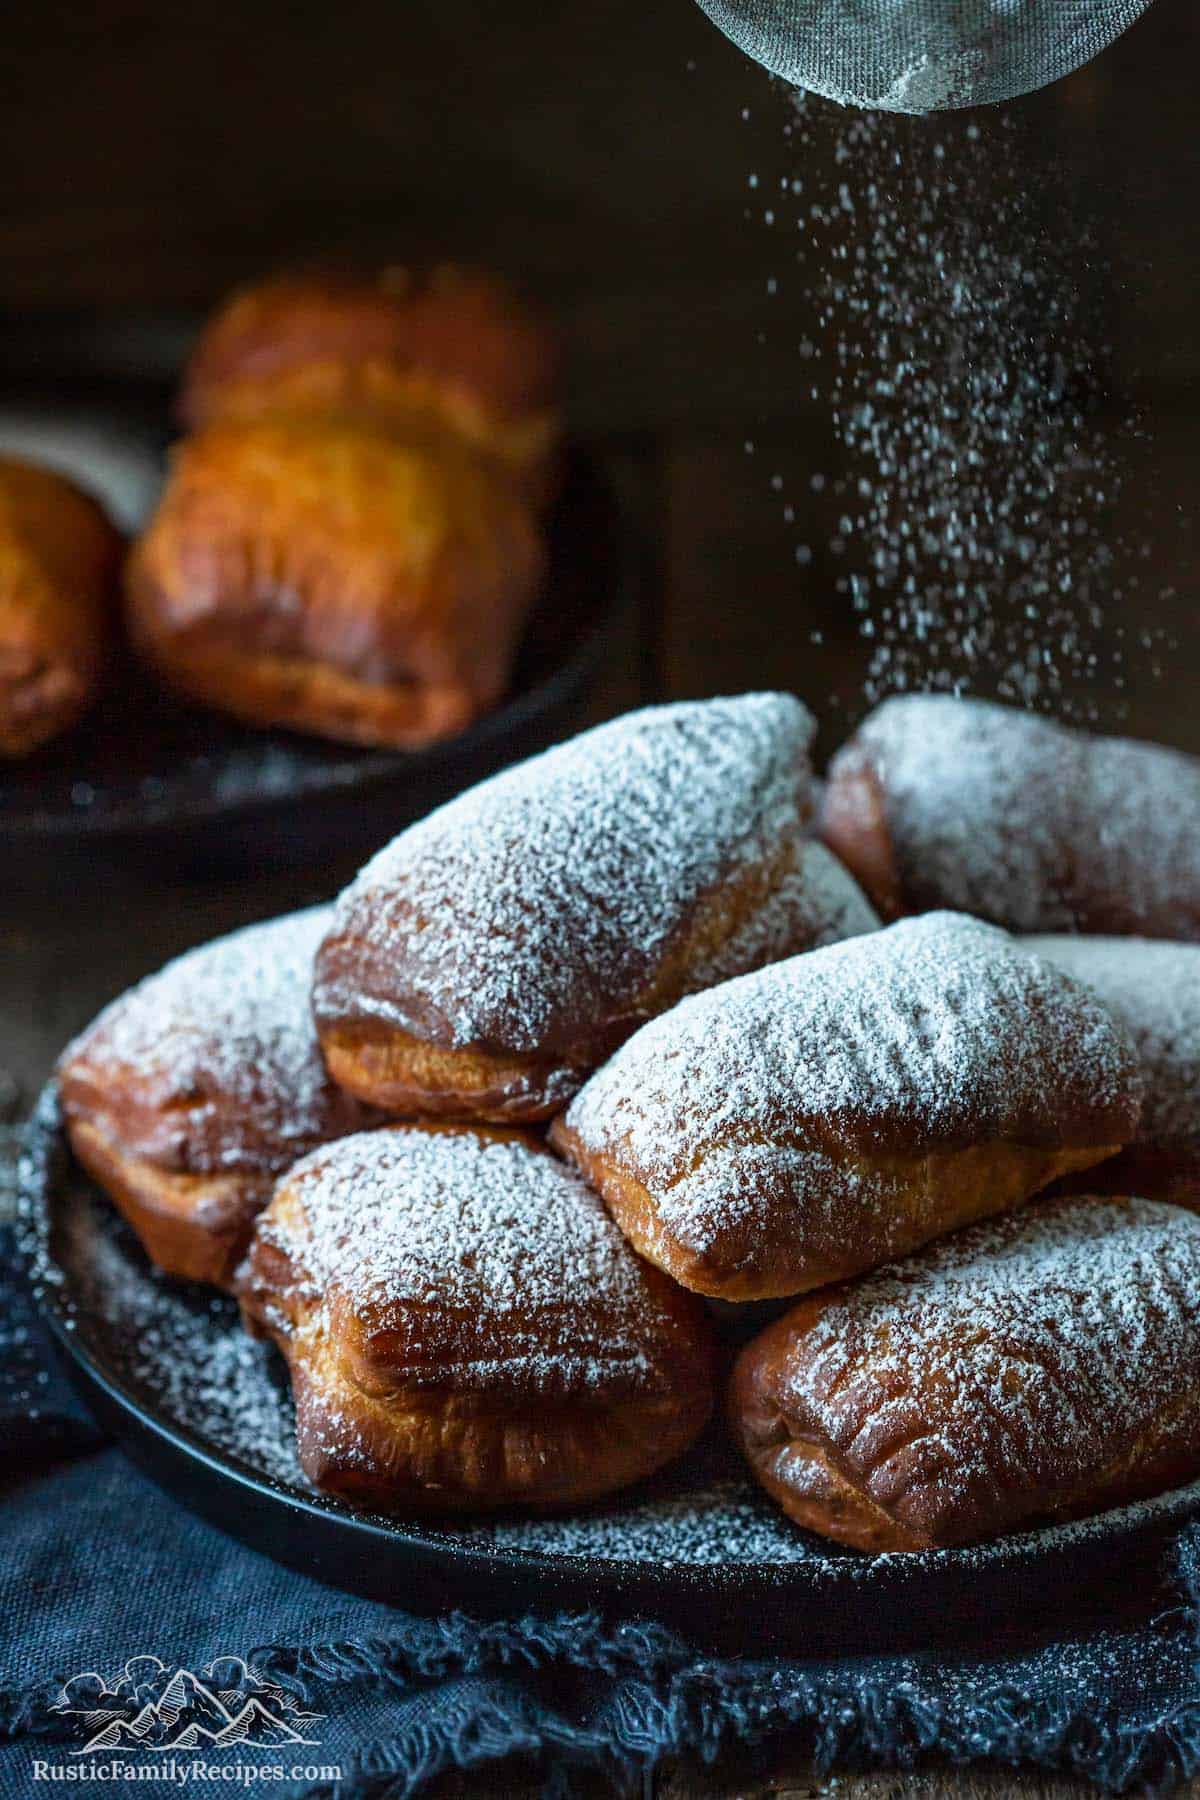 Dusting homemade beignets with sugar